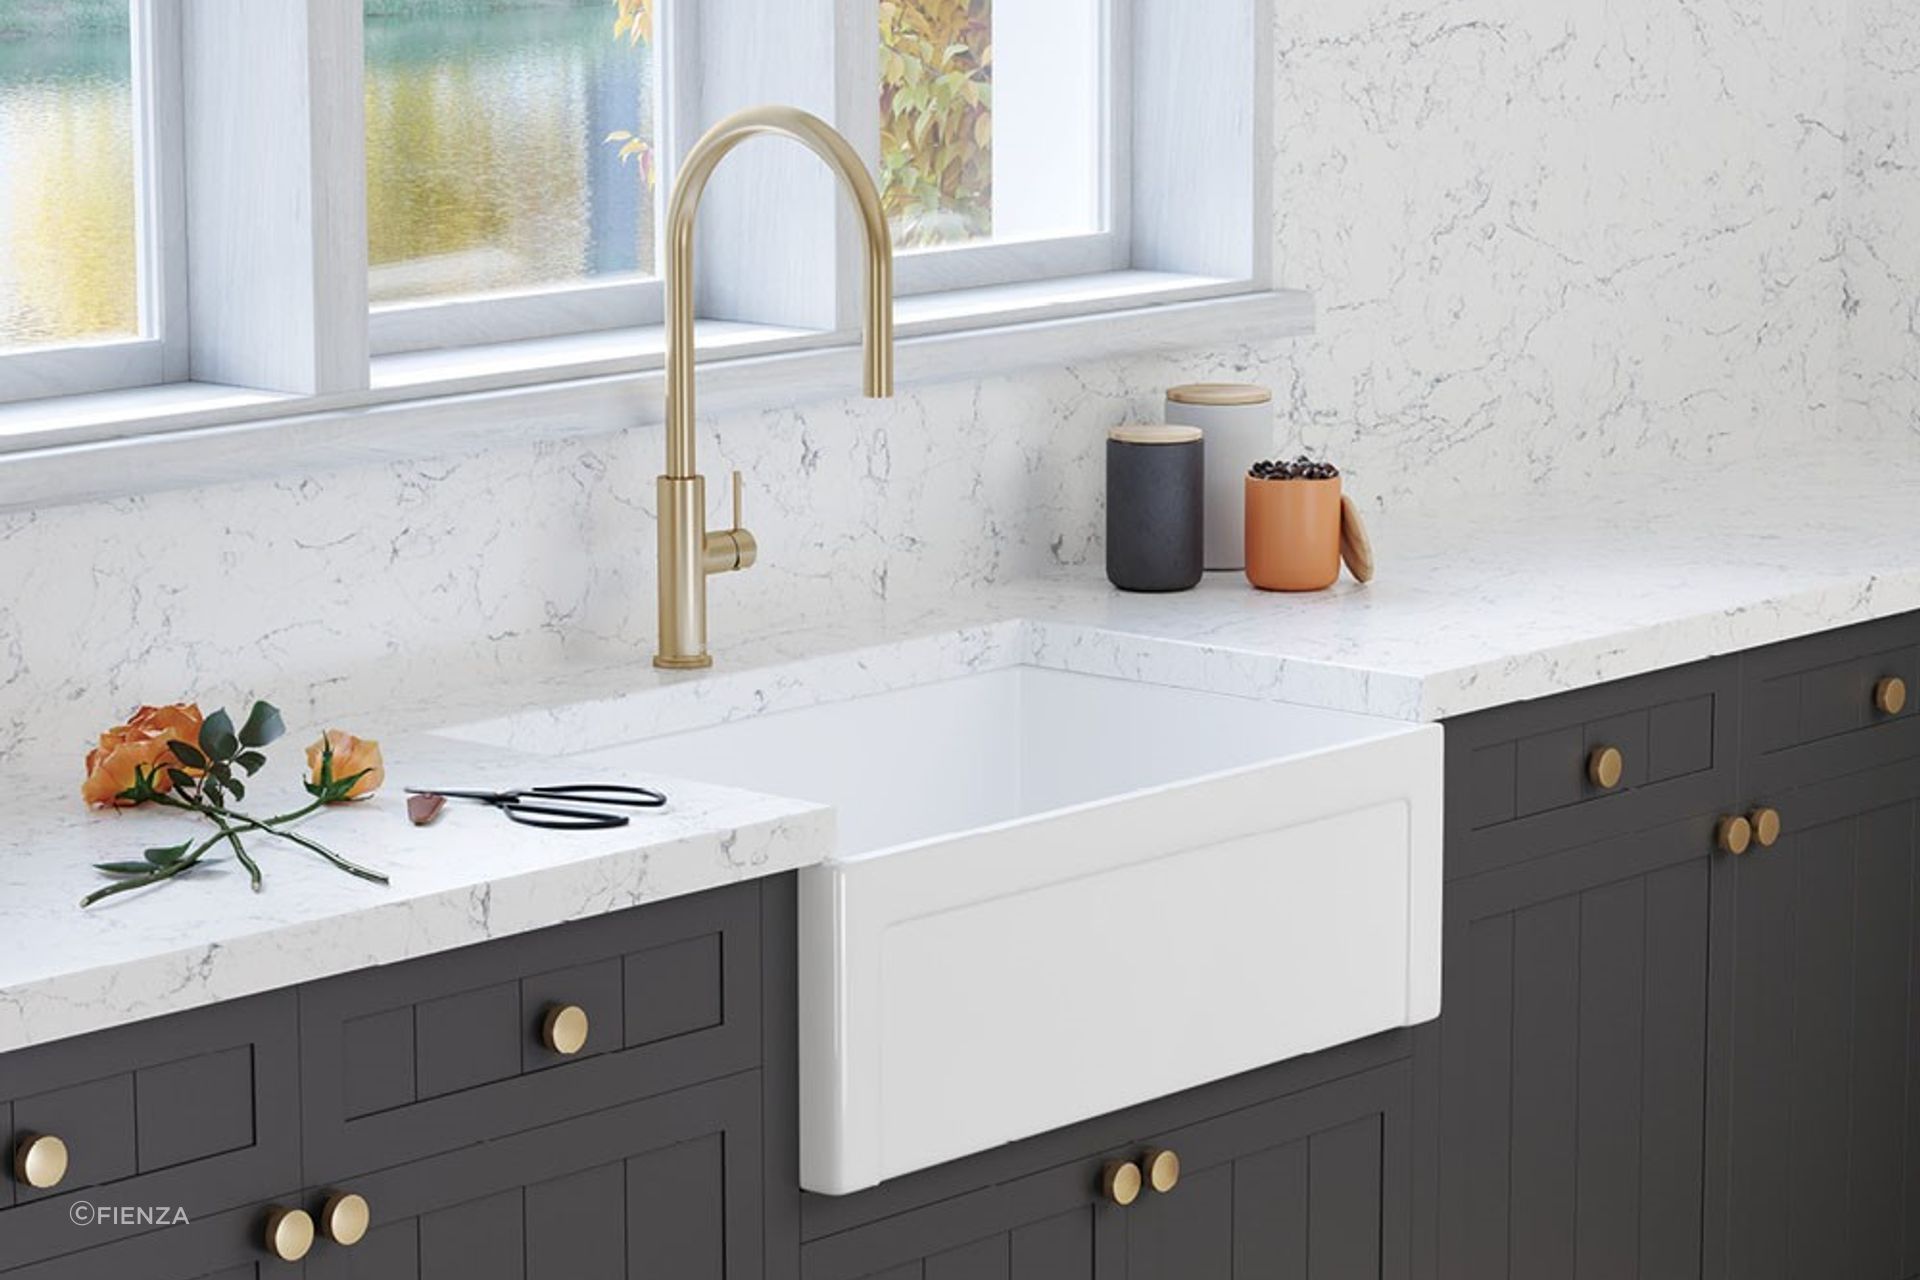 A high-quality ceramic sink that is great for any kitchen — The Winston Single Butler Sink from Fienza.